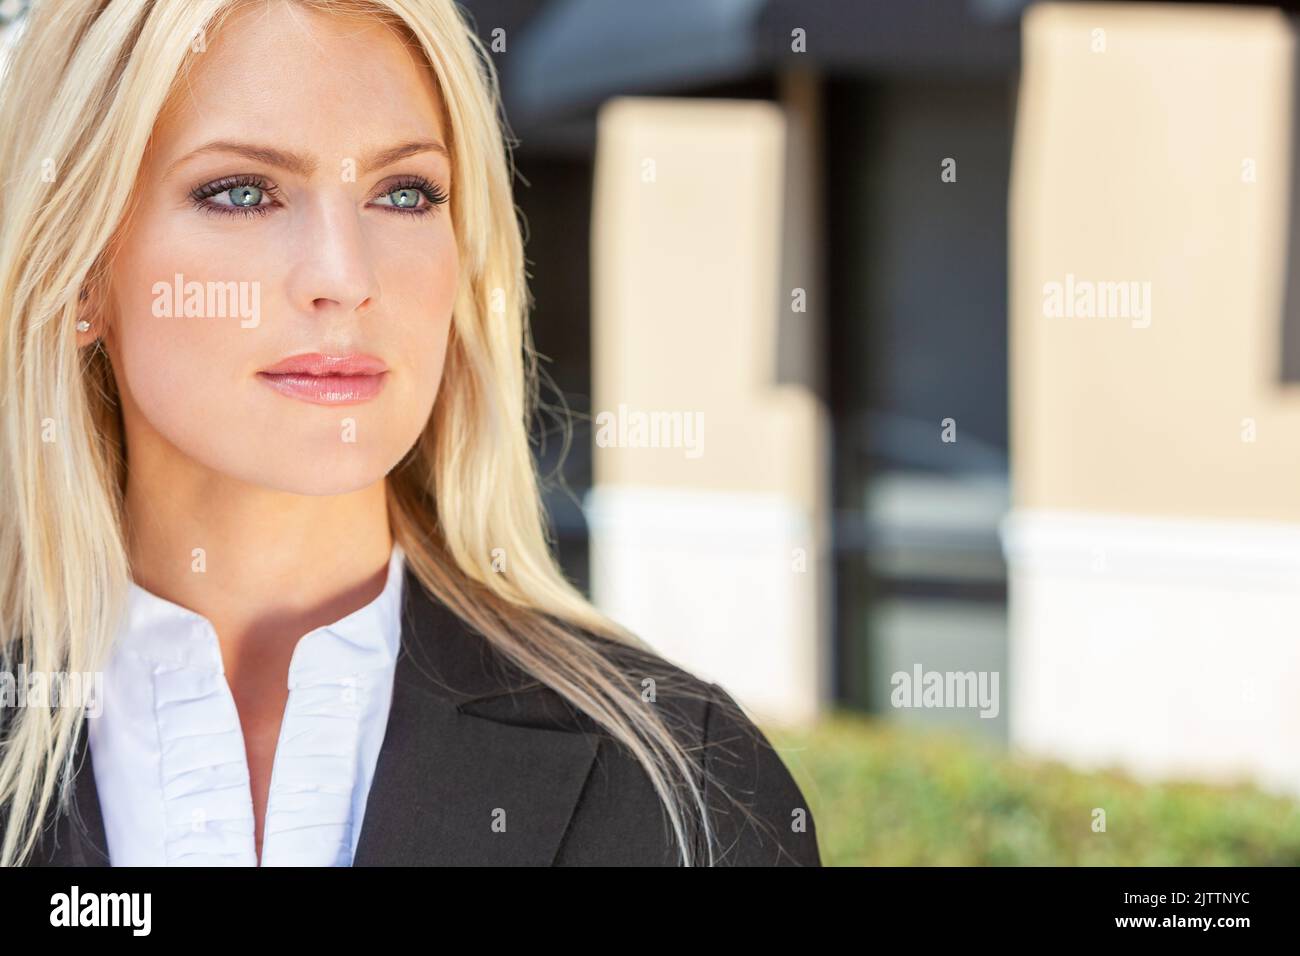 Natural light outdoor portrait of a beautiful blond woman with blue eyes Stock Photo